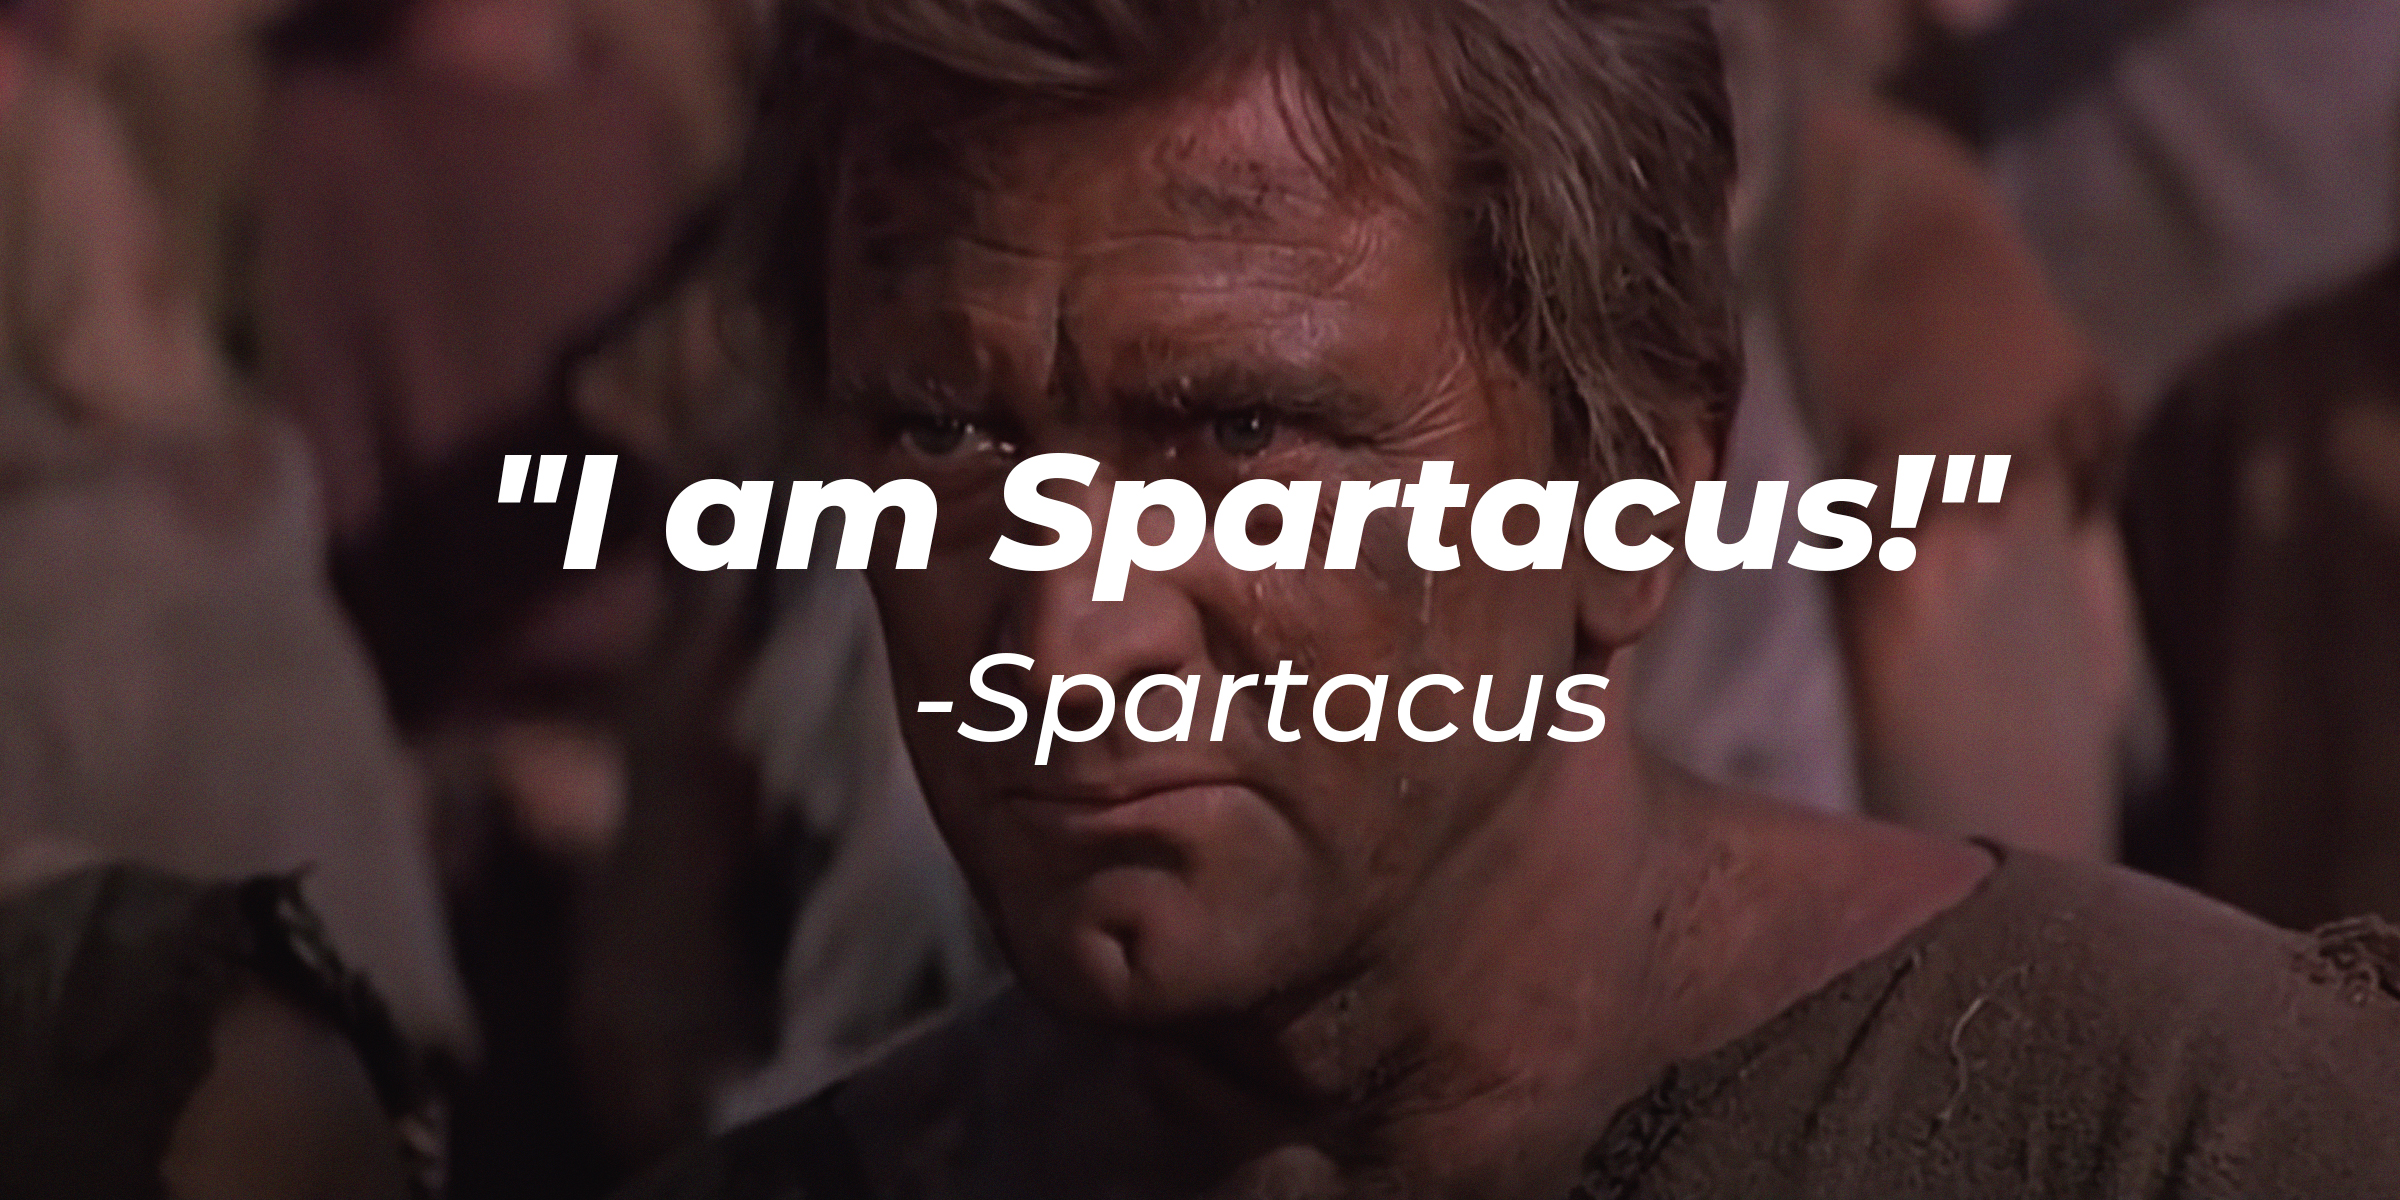 An image of the character Spartacus with his quote: “I am Spartacus!” | Source: youtube.com/Starz